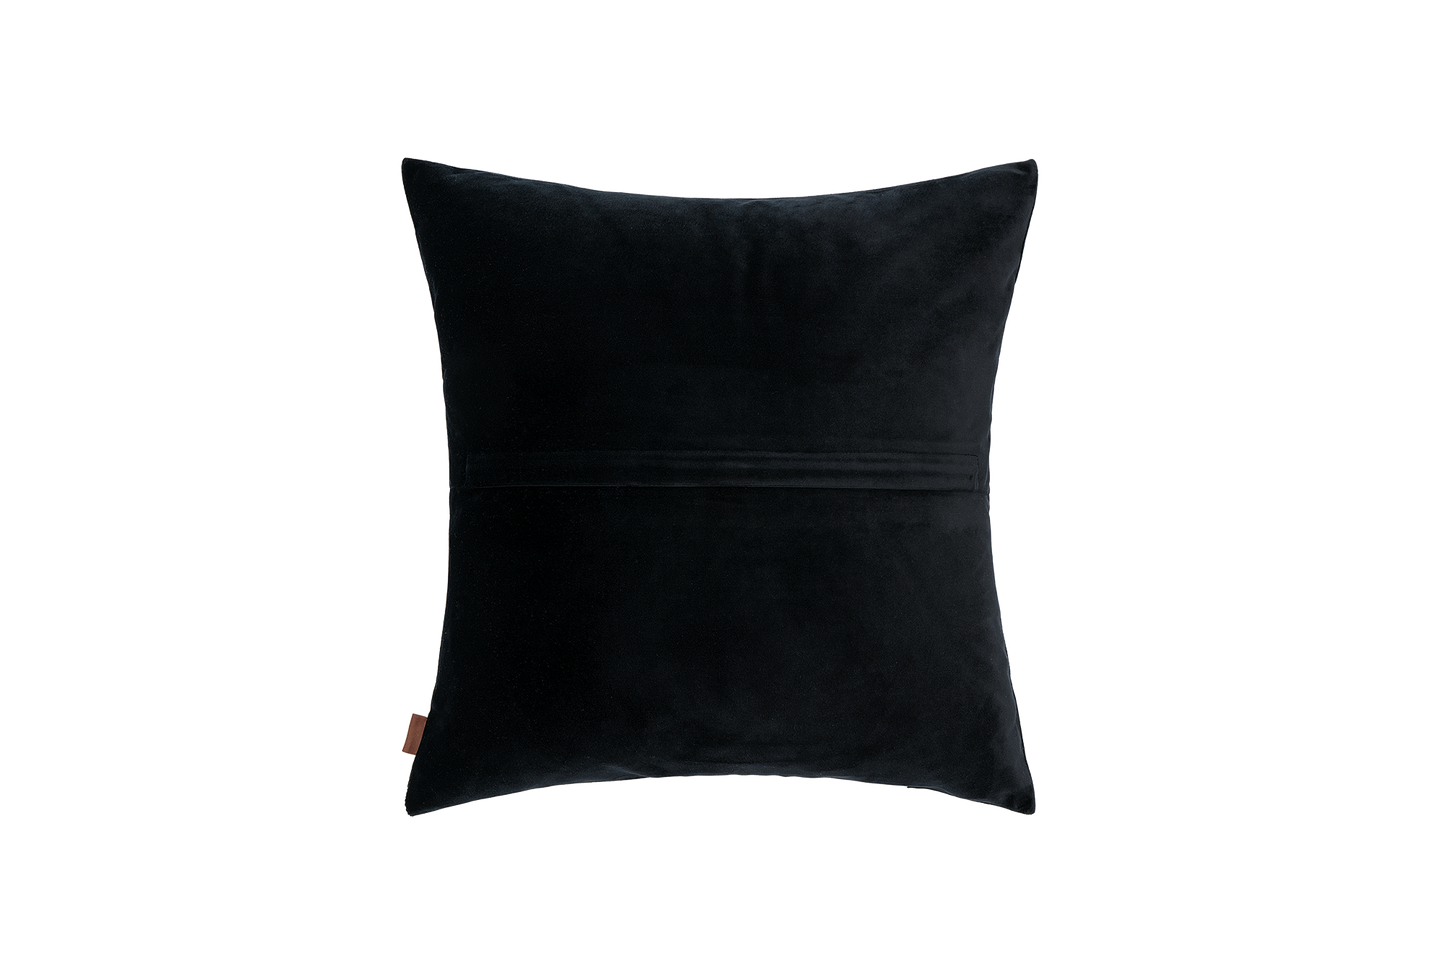 Curved Square Accent Pillow Cushion Cover & Insert Black/White